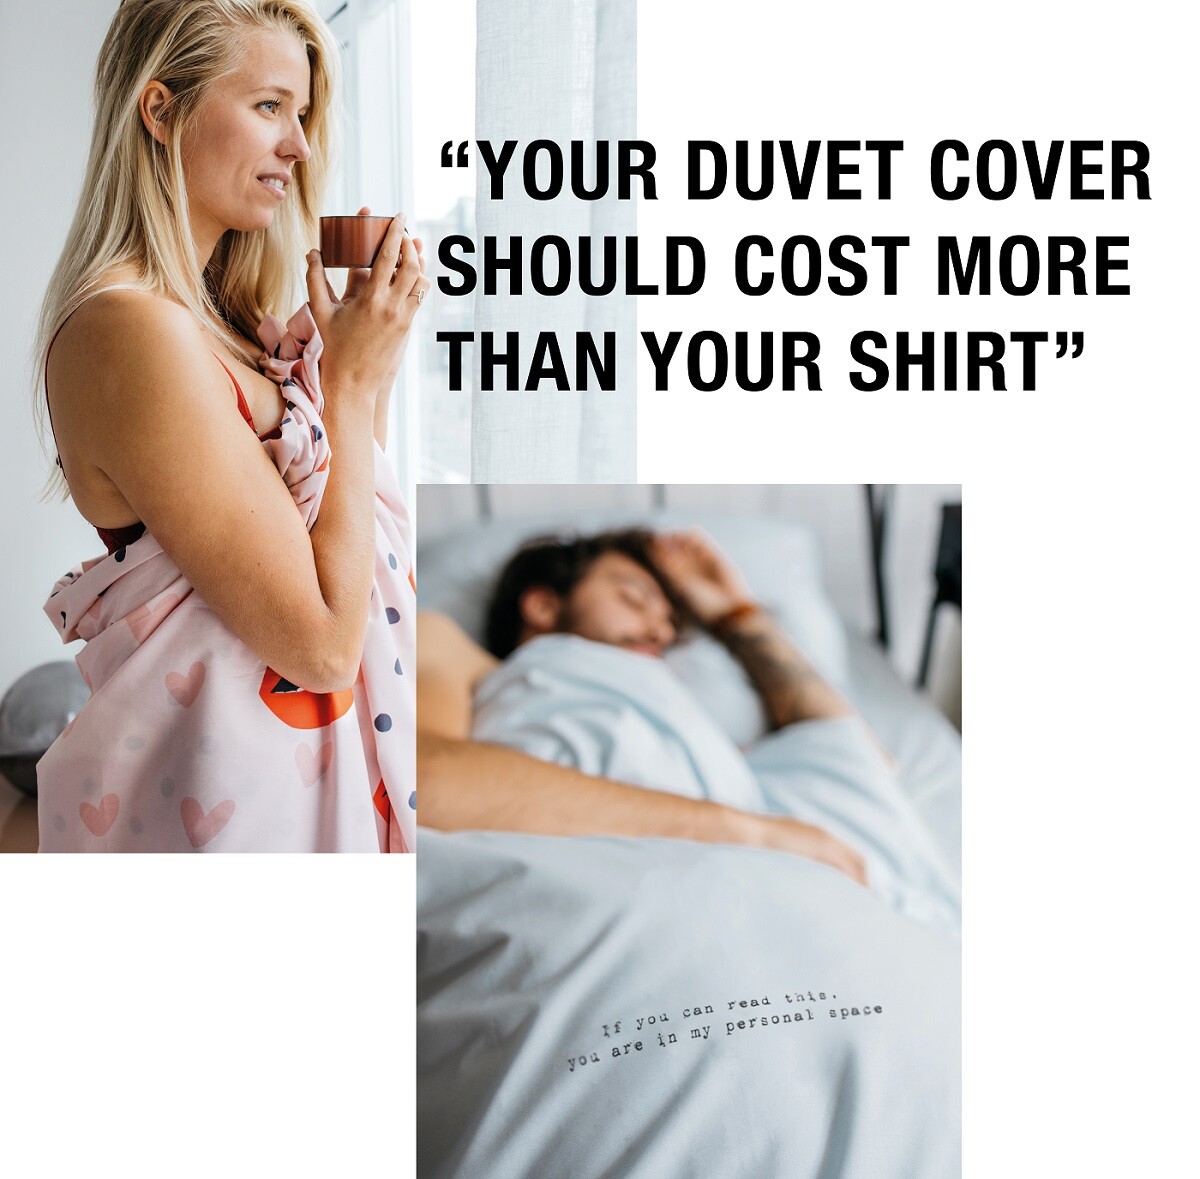 Your duvet cover should cost more than your t-shirt